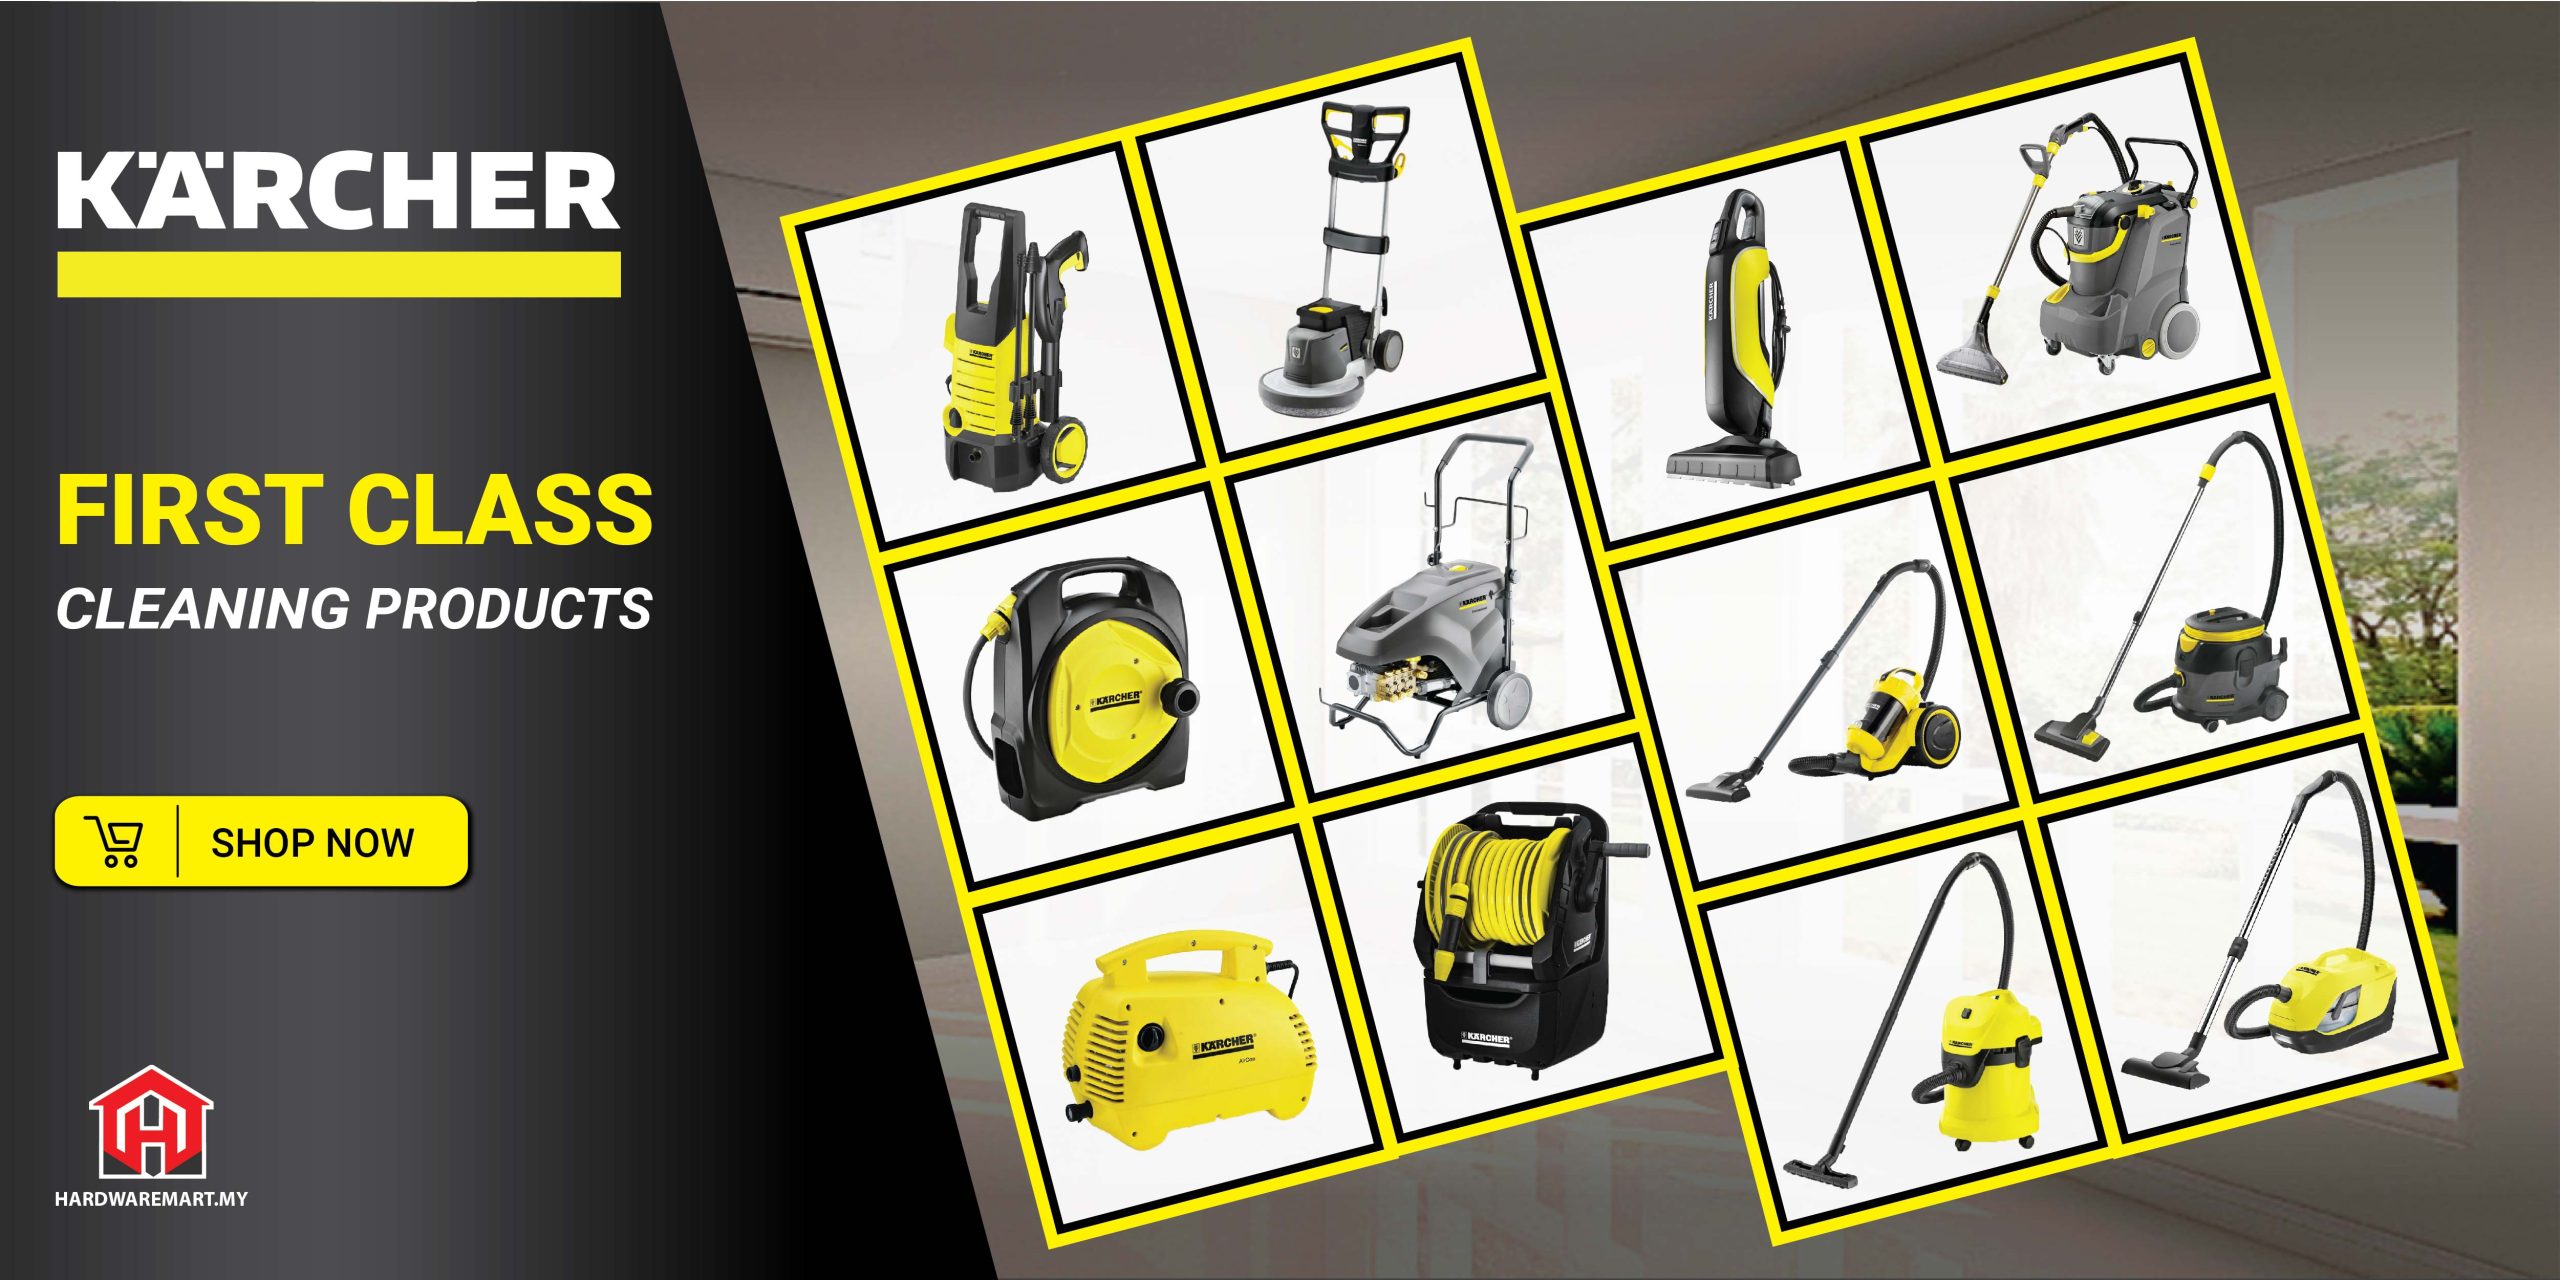 Karcher Cleaning Equipment Year End Promotion!